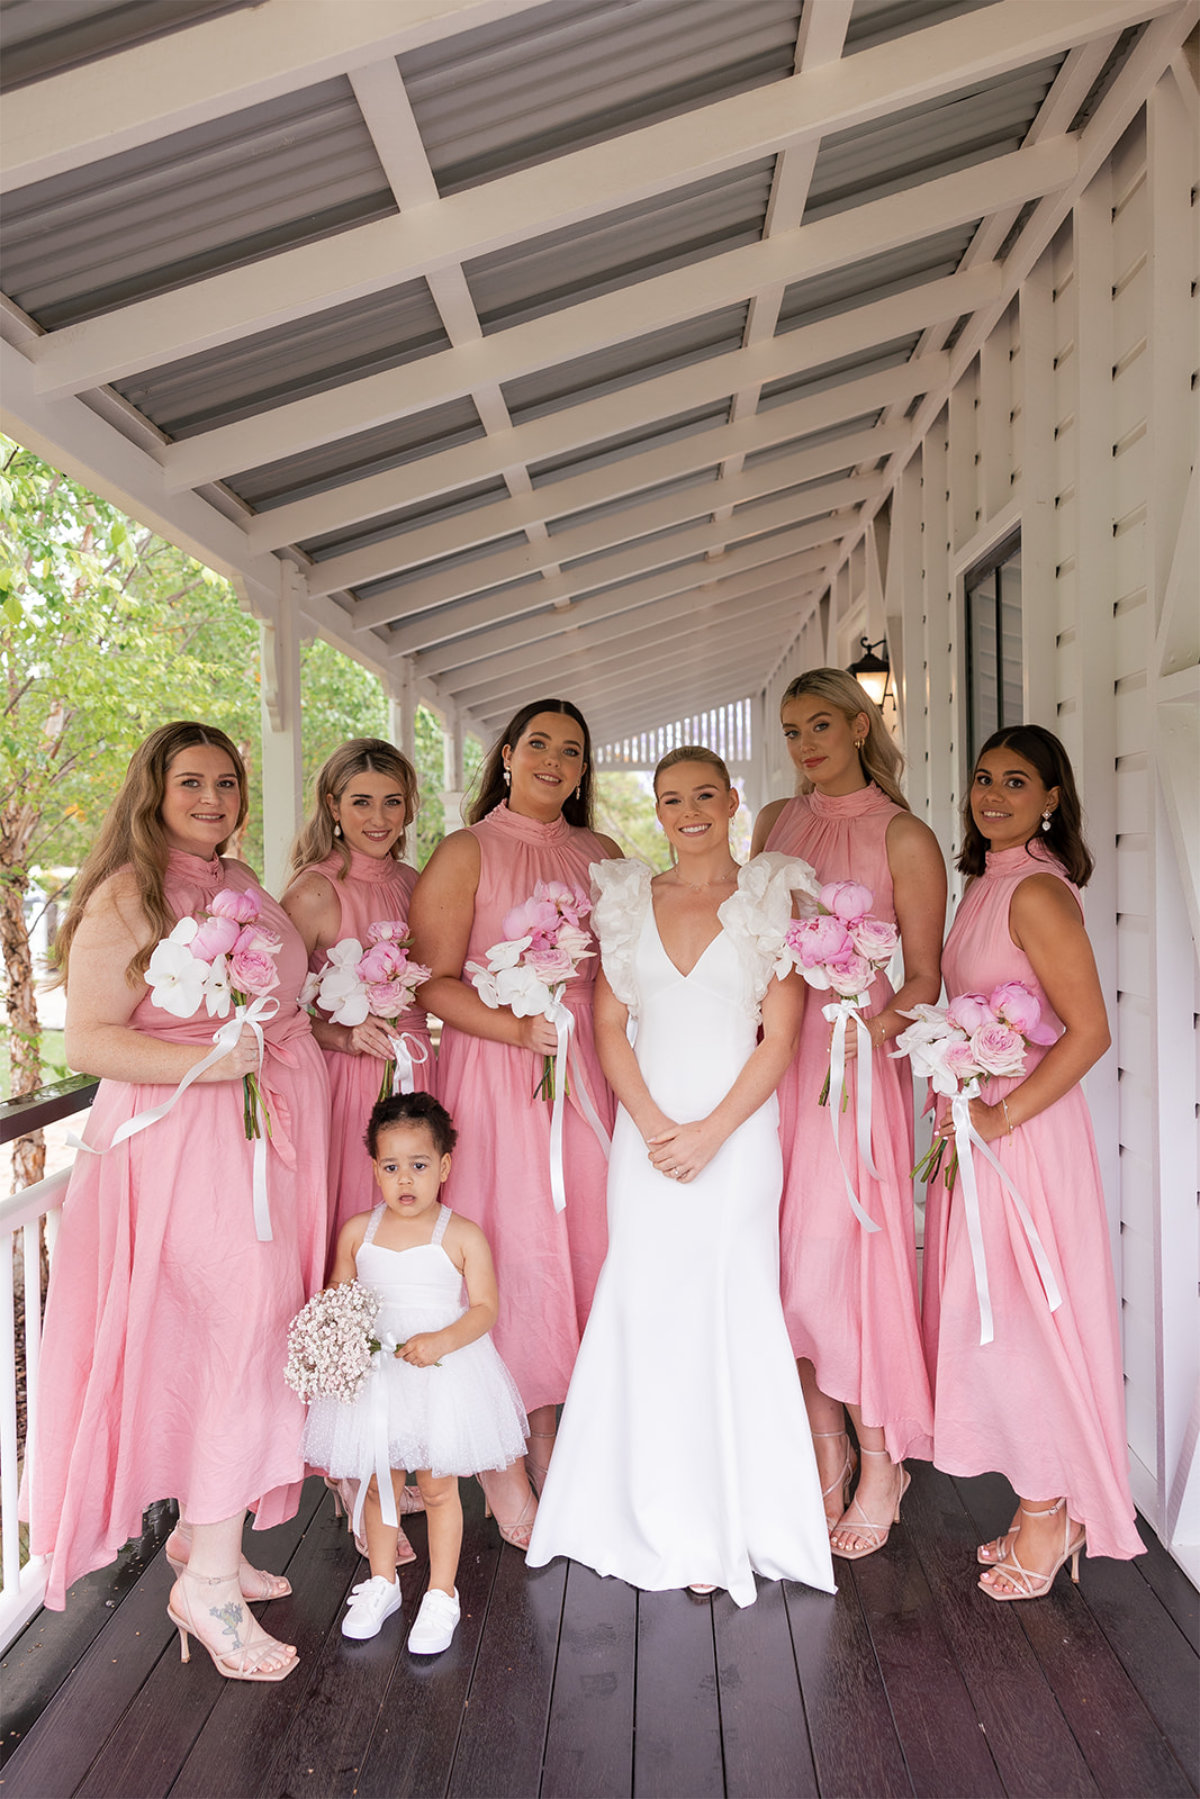 Keili and Zach's White Chapel Kalbar wedding captured by Figtree Pictures